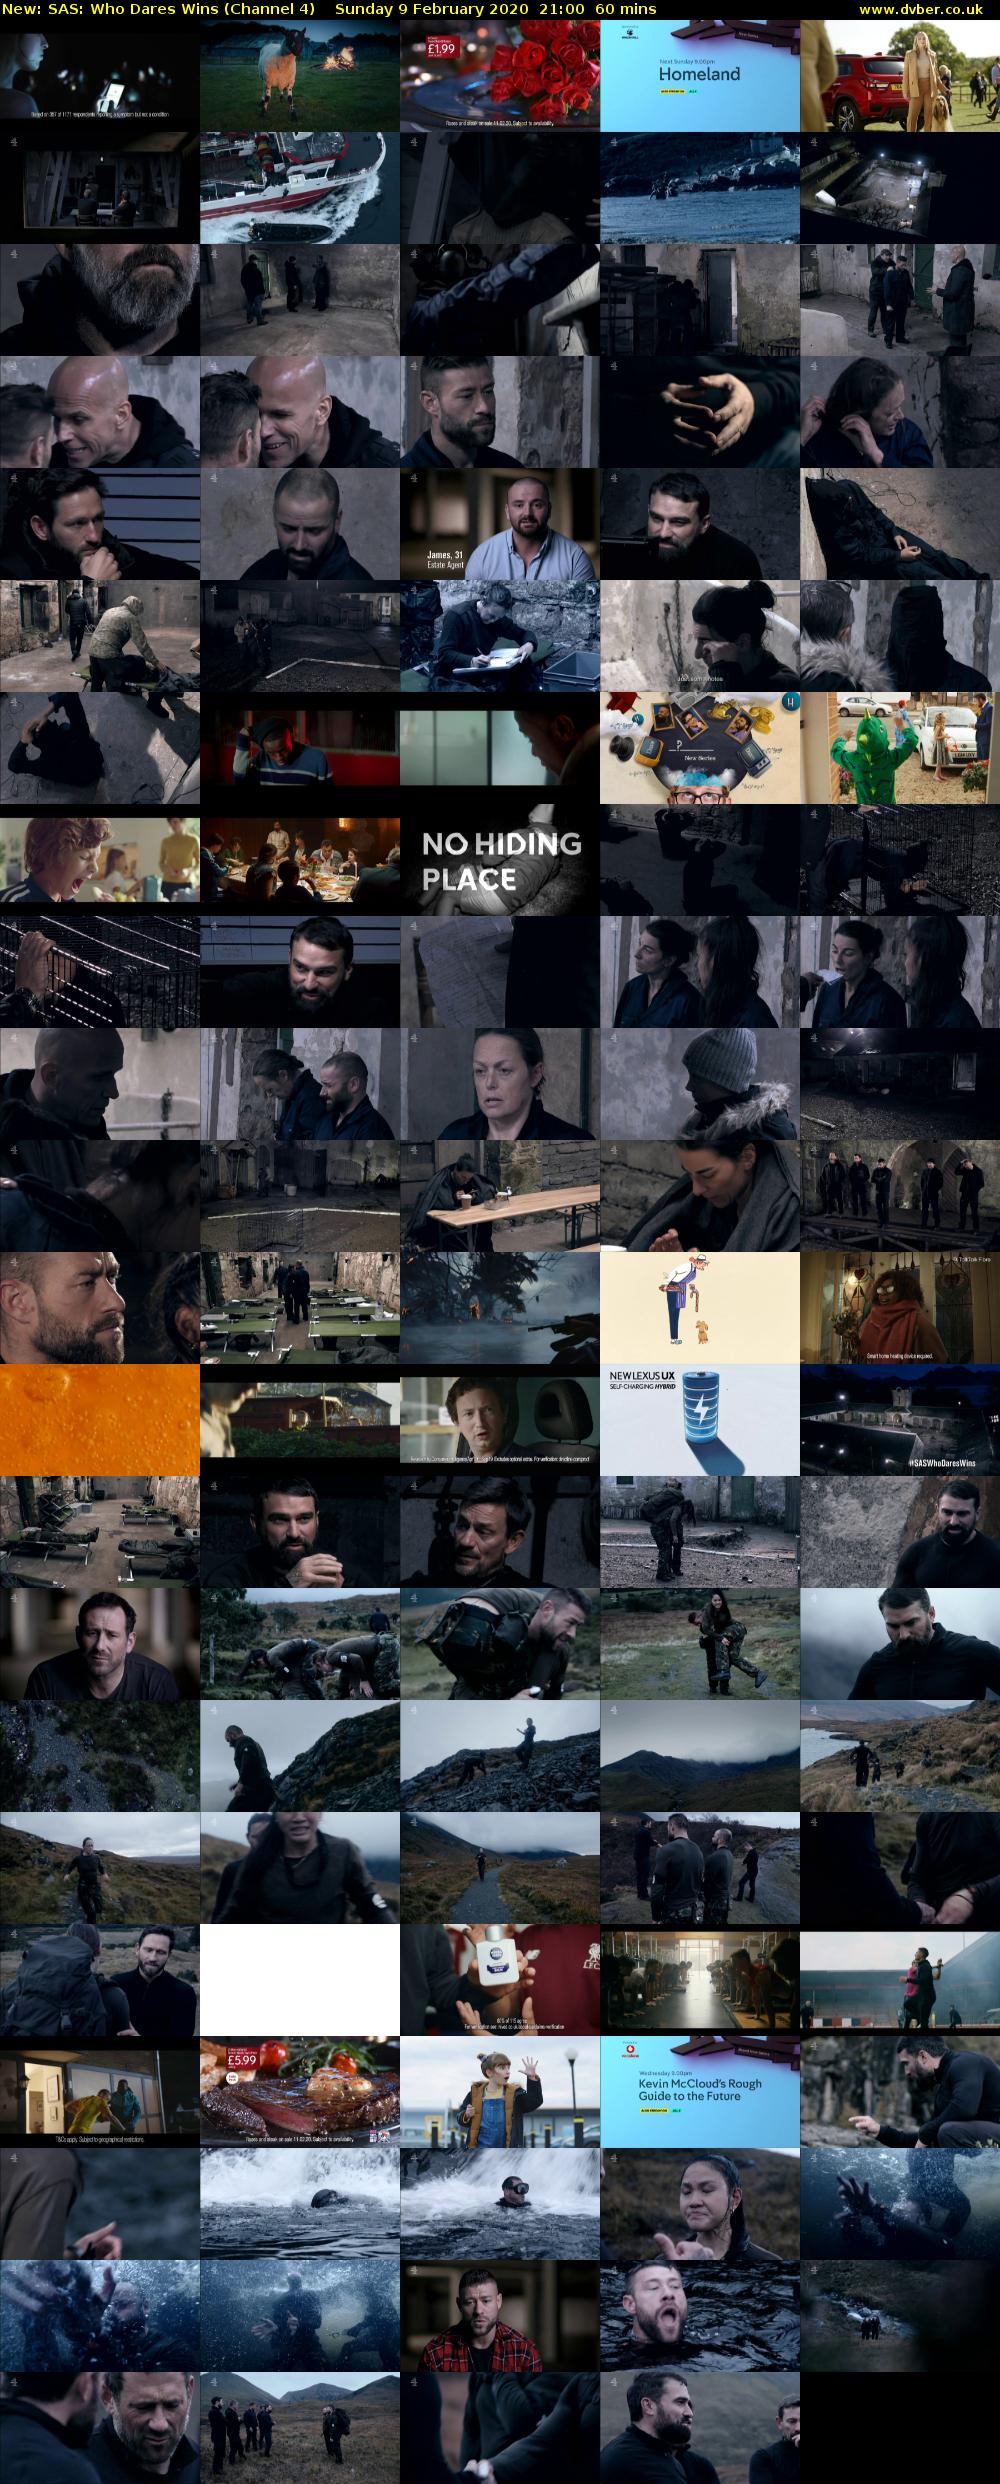 SAS: Who Dares Wins (Channel 4) Sunday 9 February 2020 21:00 - 22:00